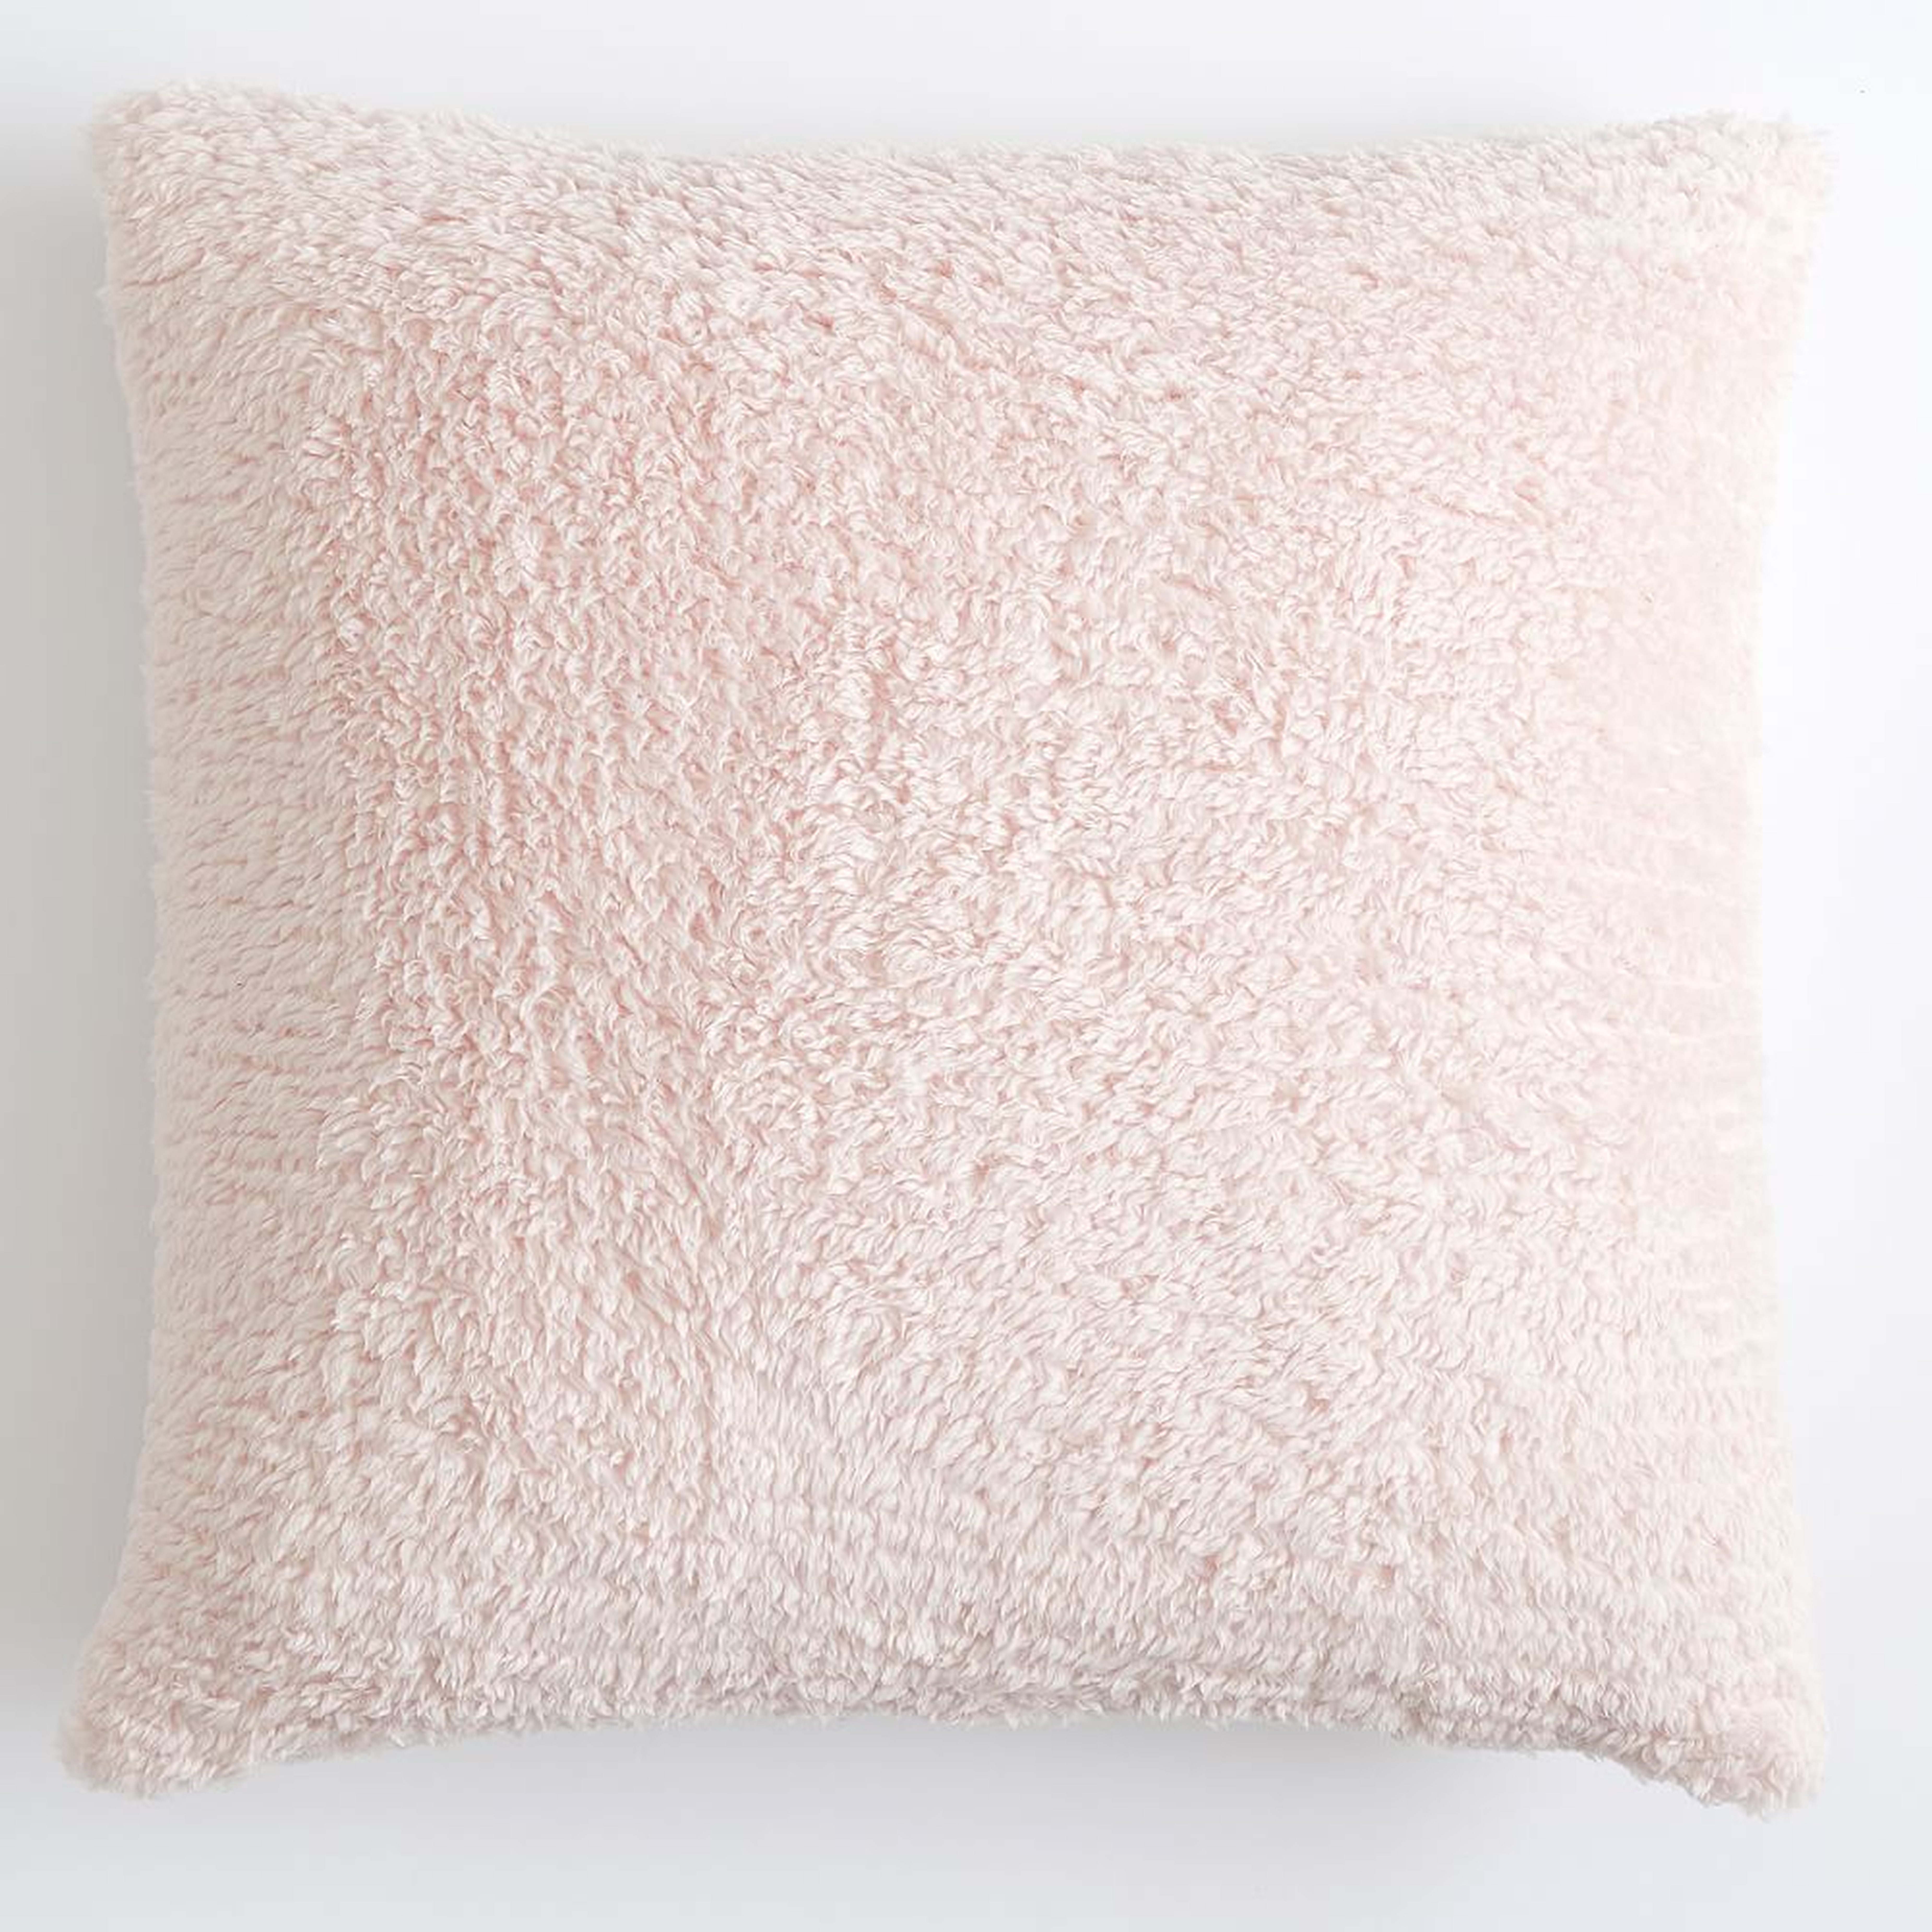 Cozy Euro Recycled Sherpa Pillow Cover, 26x26, Powdered Blush - Pottery Barn Teen